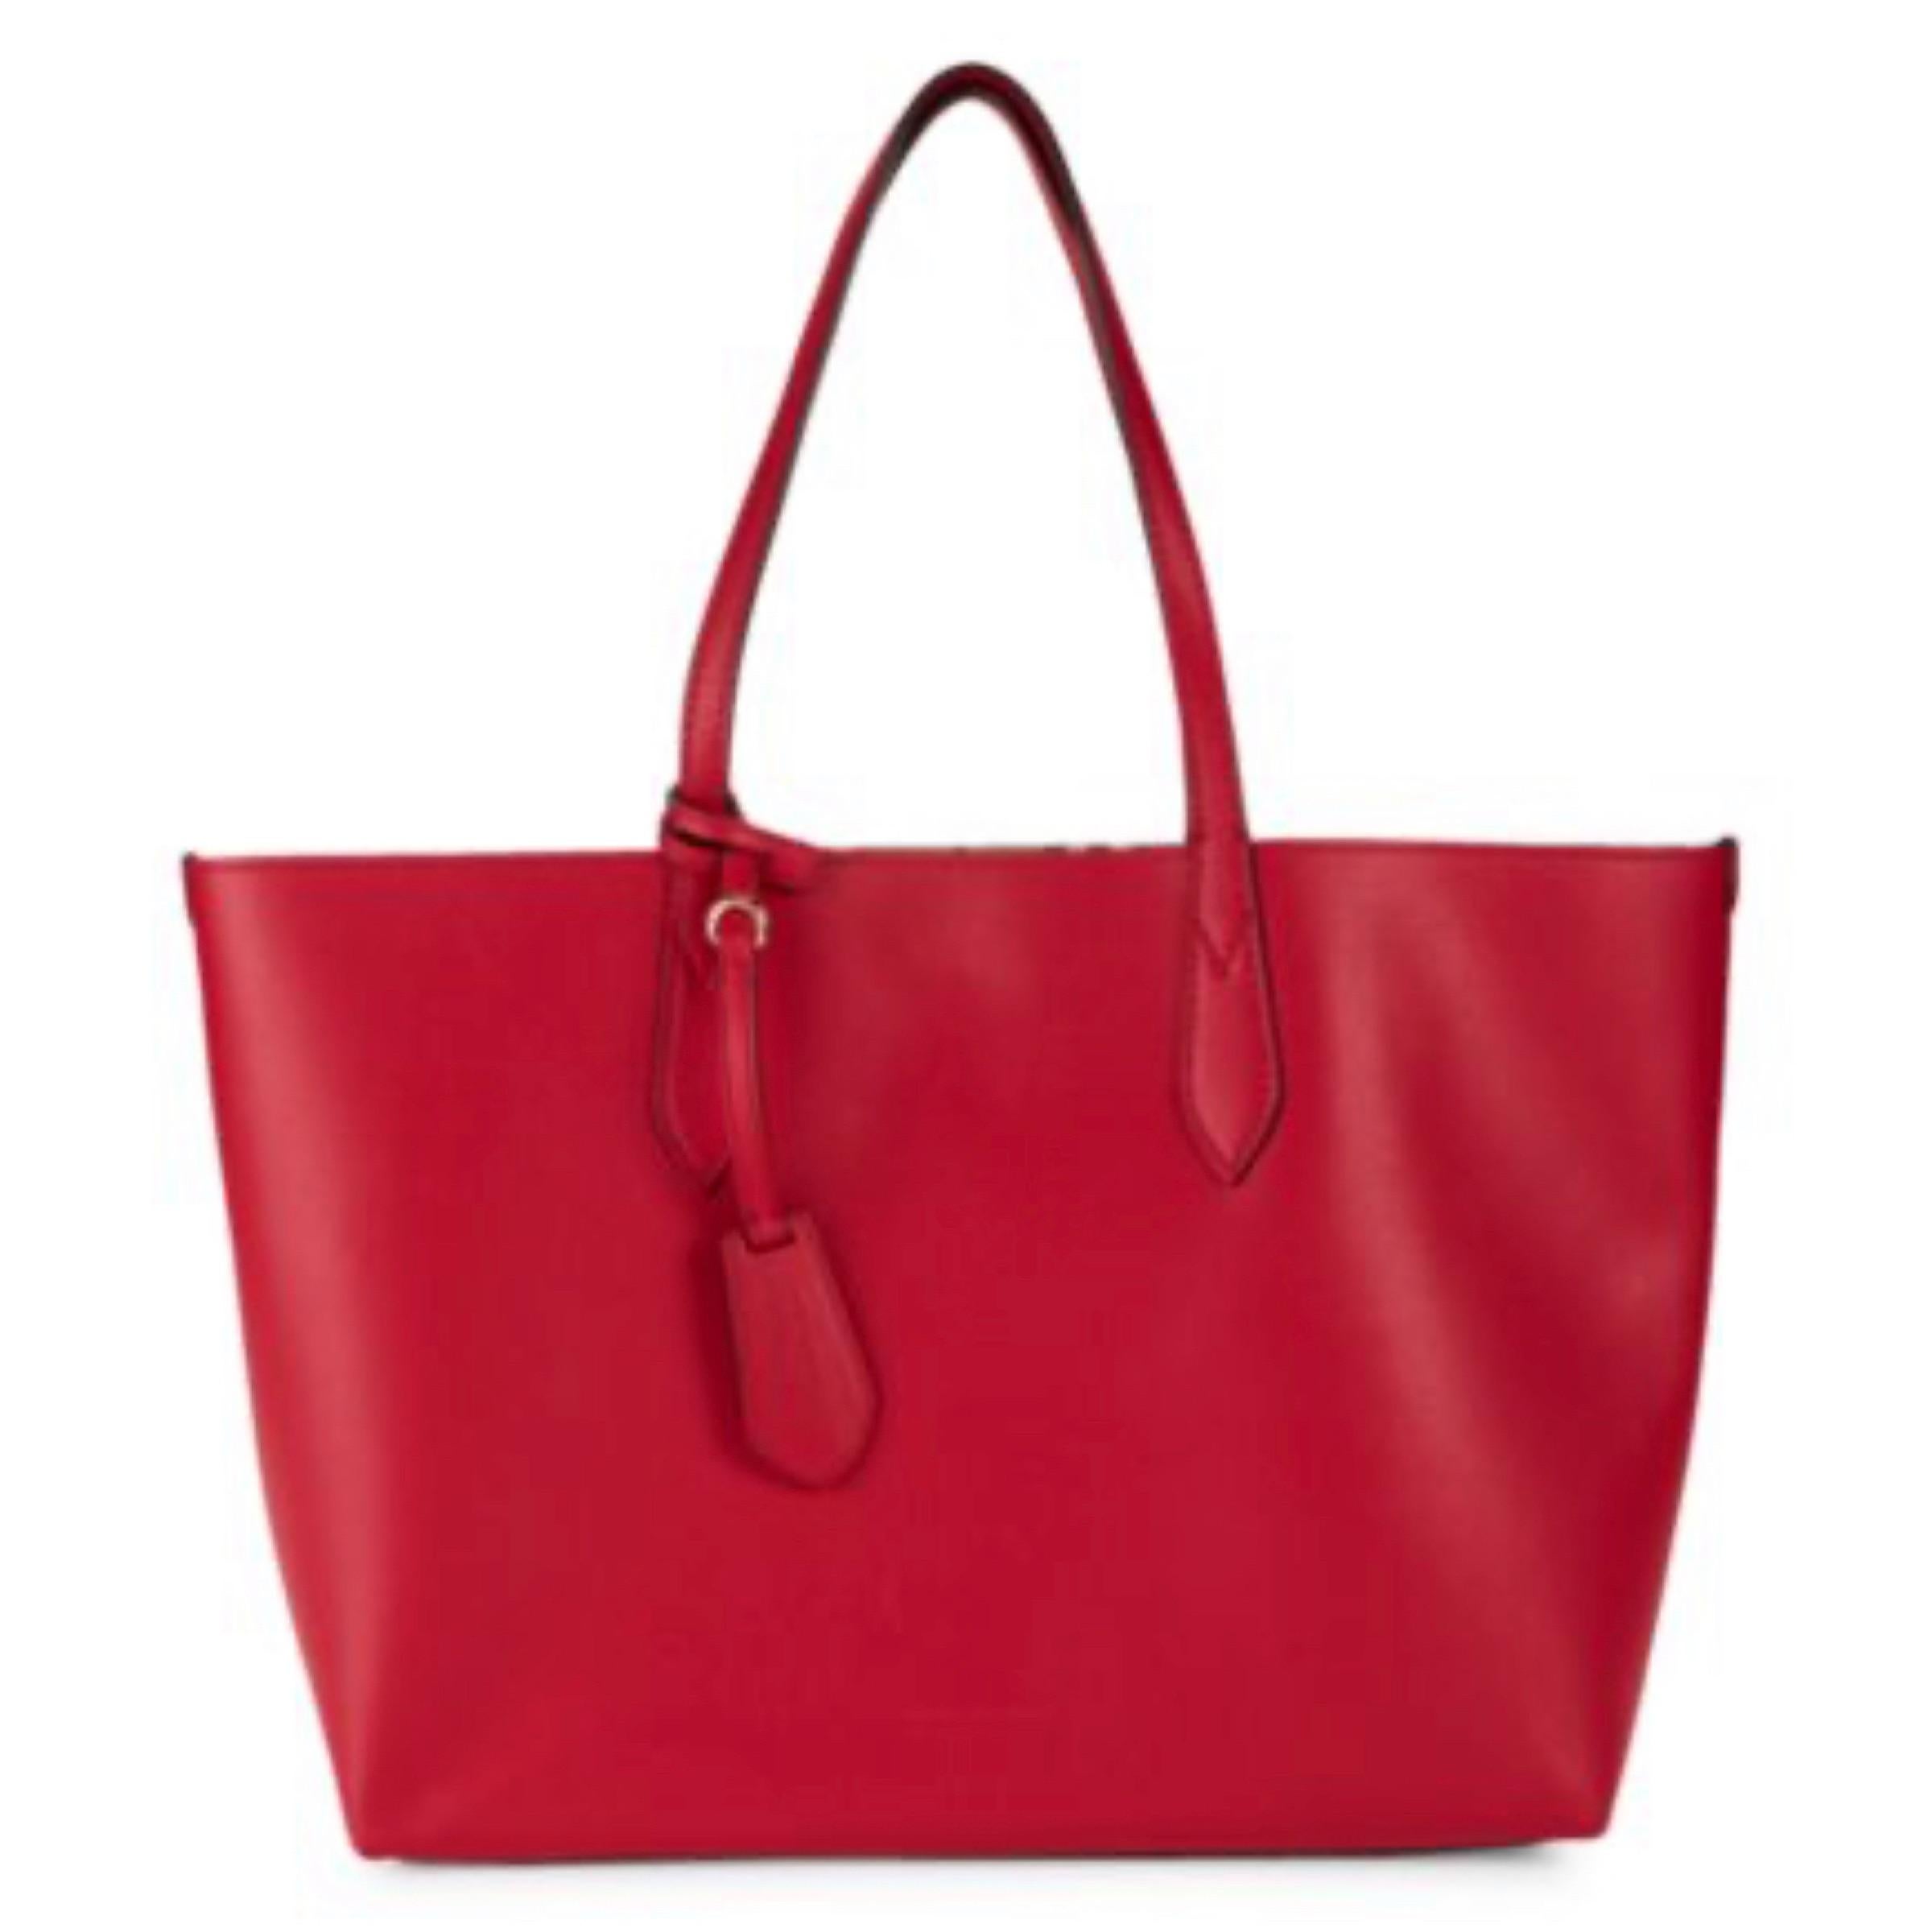 NEW Burberry Red Haymarket Check Reversible Leather Tote Shoulder Bag For Sale 6